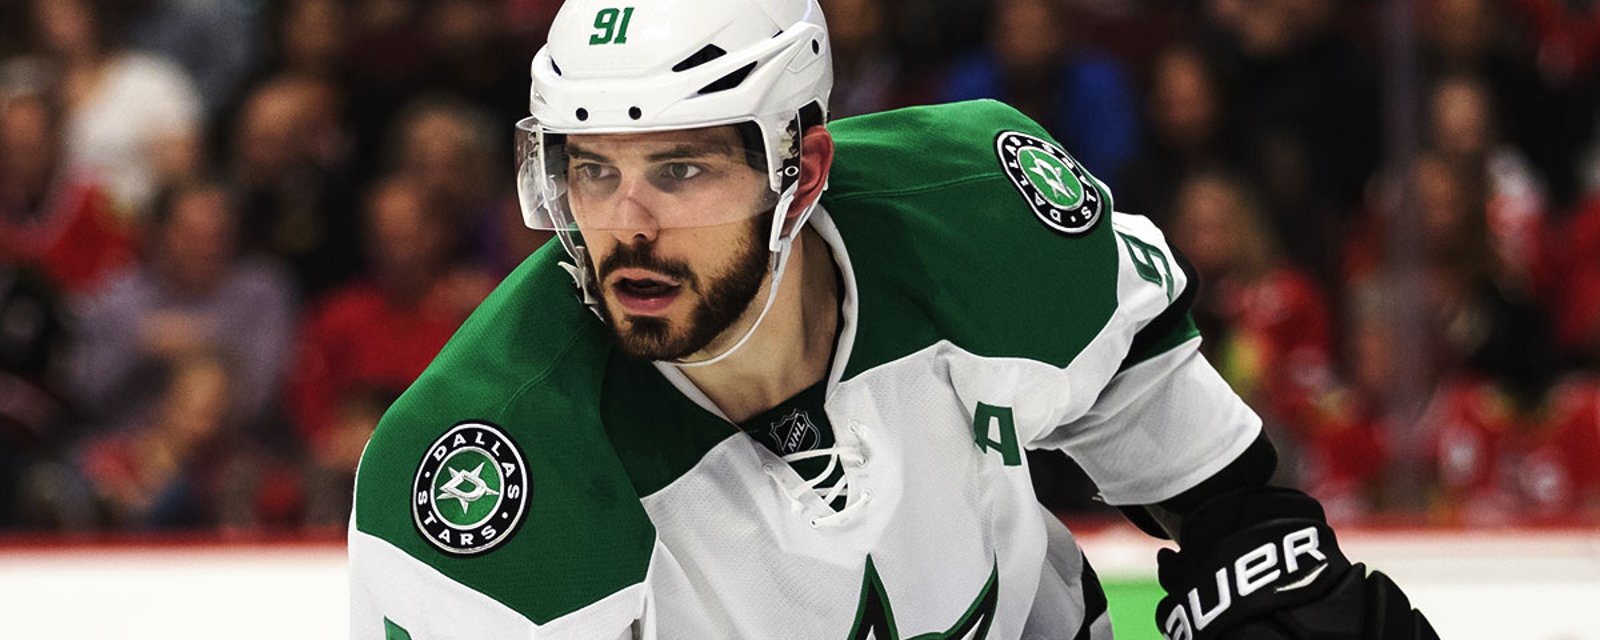 Video: Colorado's player out for 2 months after blocking Tyler Seguin's shot!